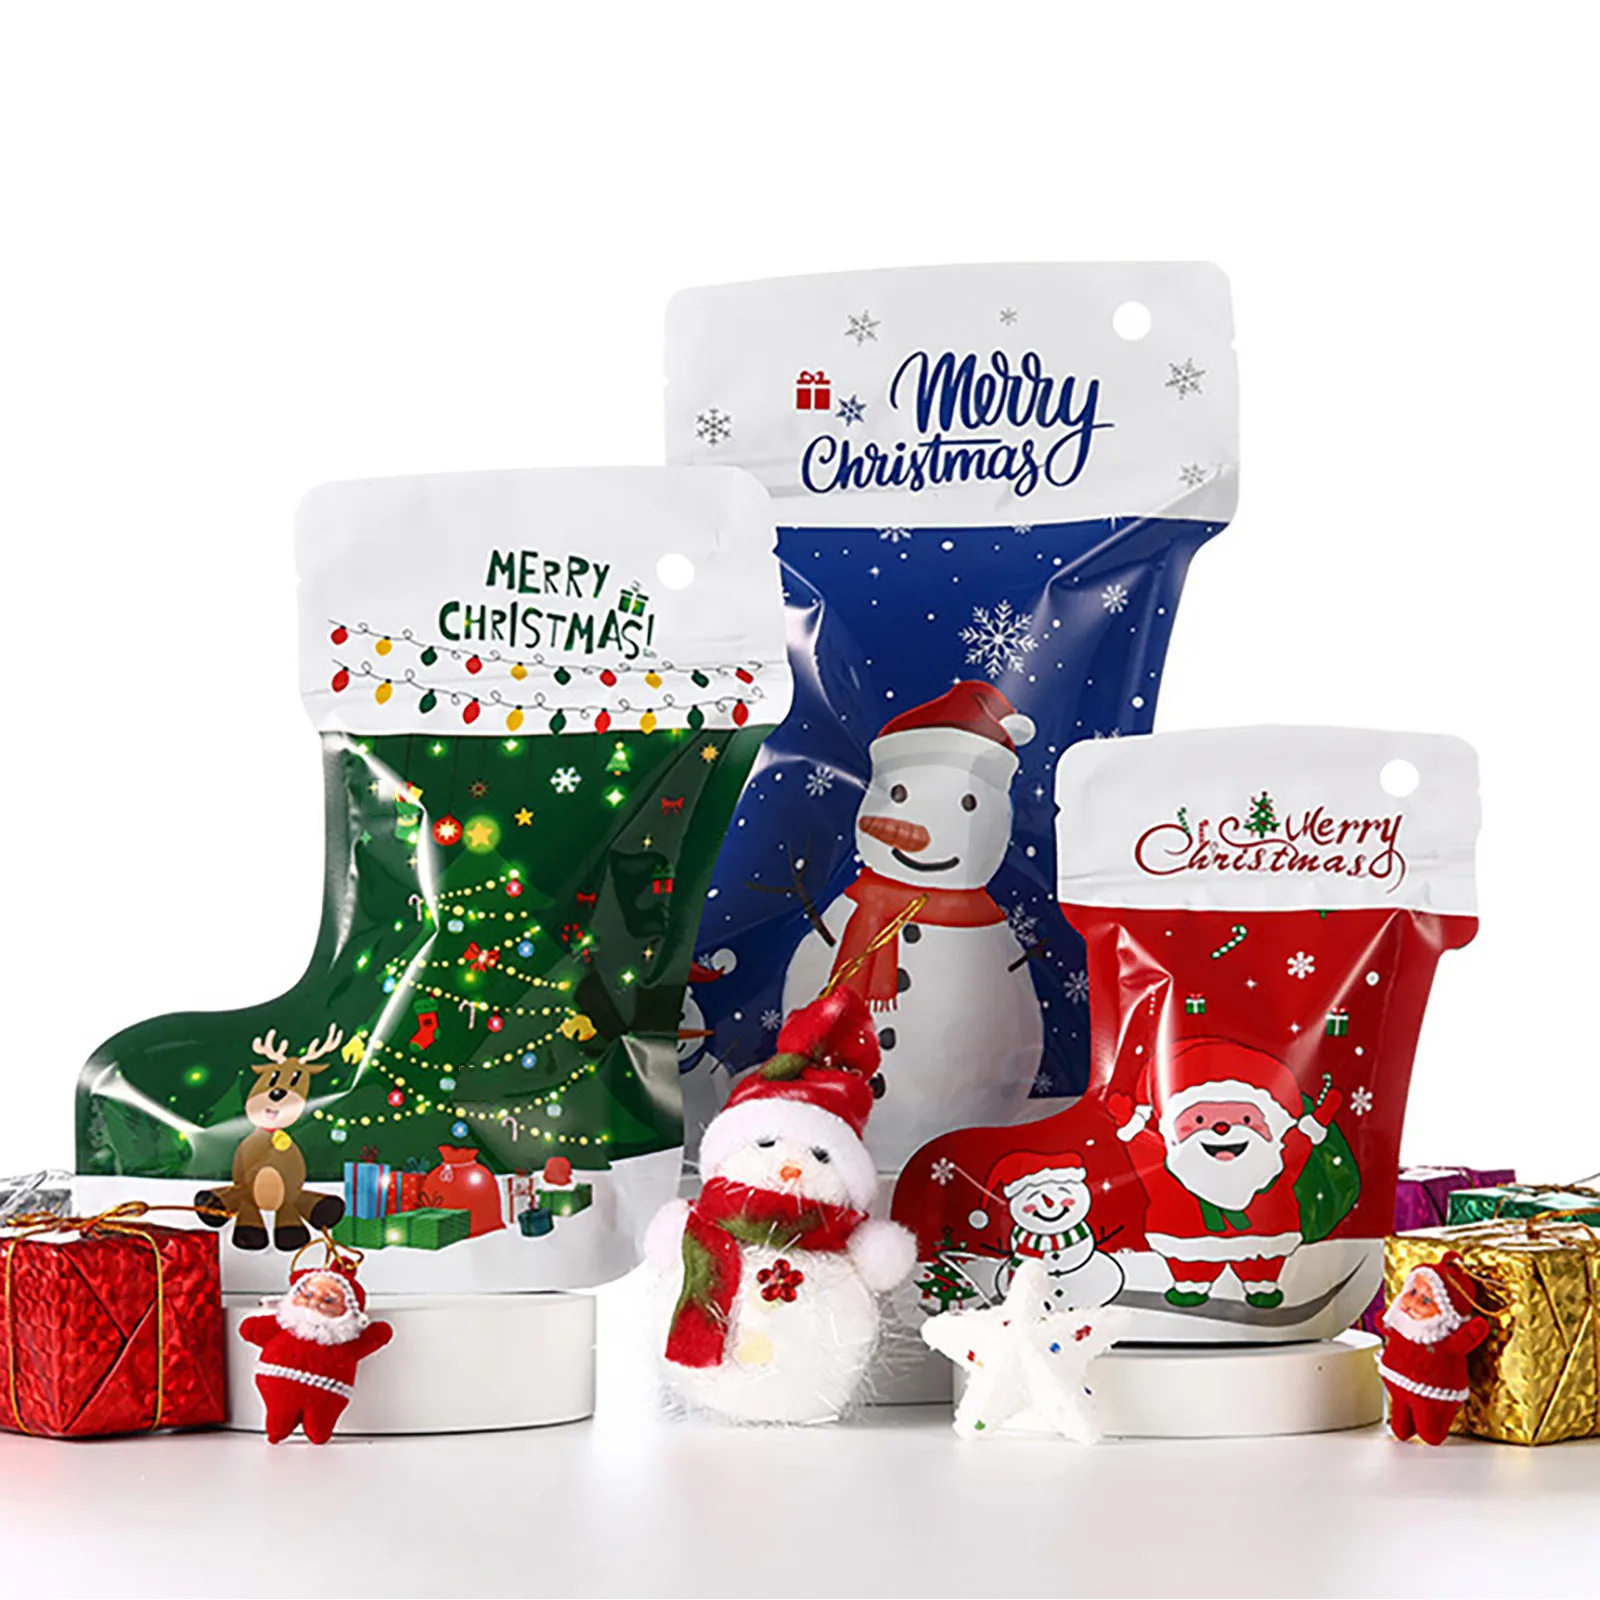 https://ae01.alicdn.com/kf/H4298ee0b7db24798ba5591ed1e6e7a13d/Christmas-Socks-Stand-up-Bag-Boots-Stand-up-Plastic-Bag-Jewelry-Ziplock-Bag-Christmas-Stockings-Packaging.jpg